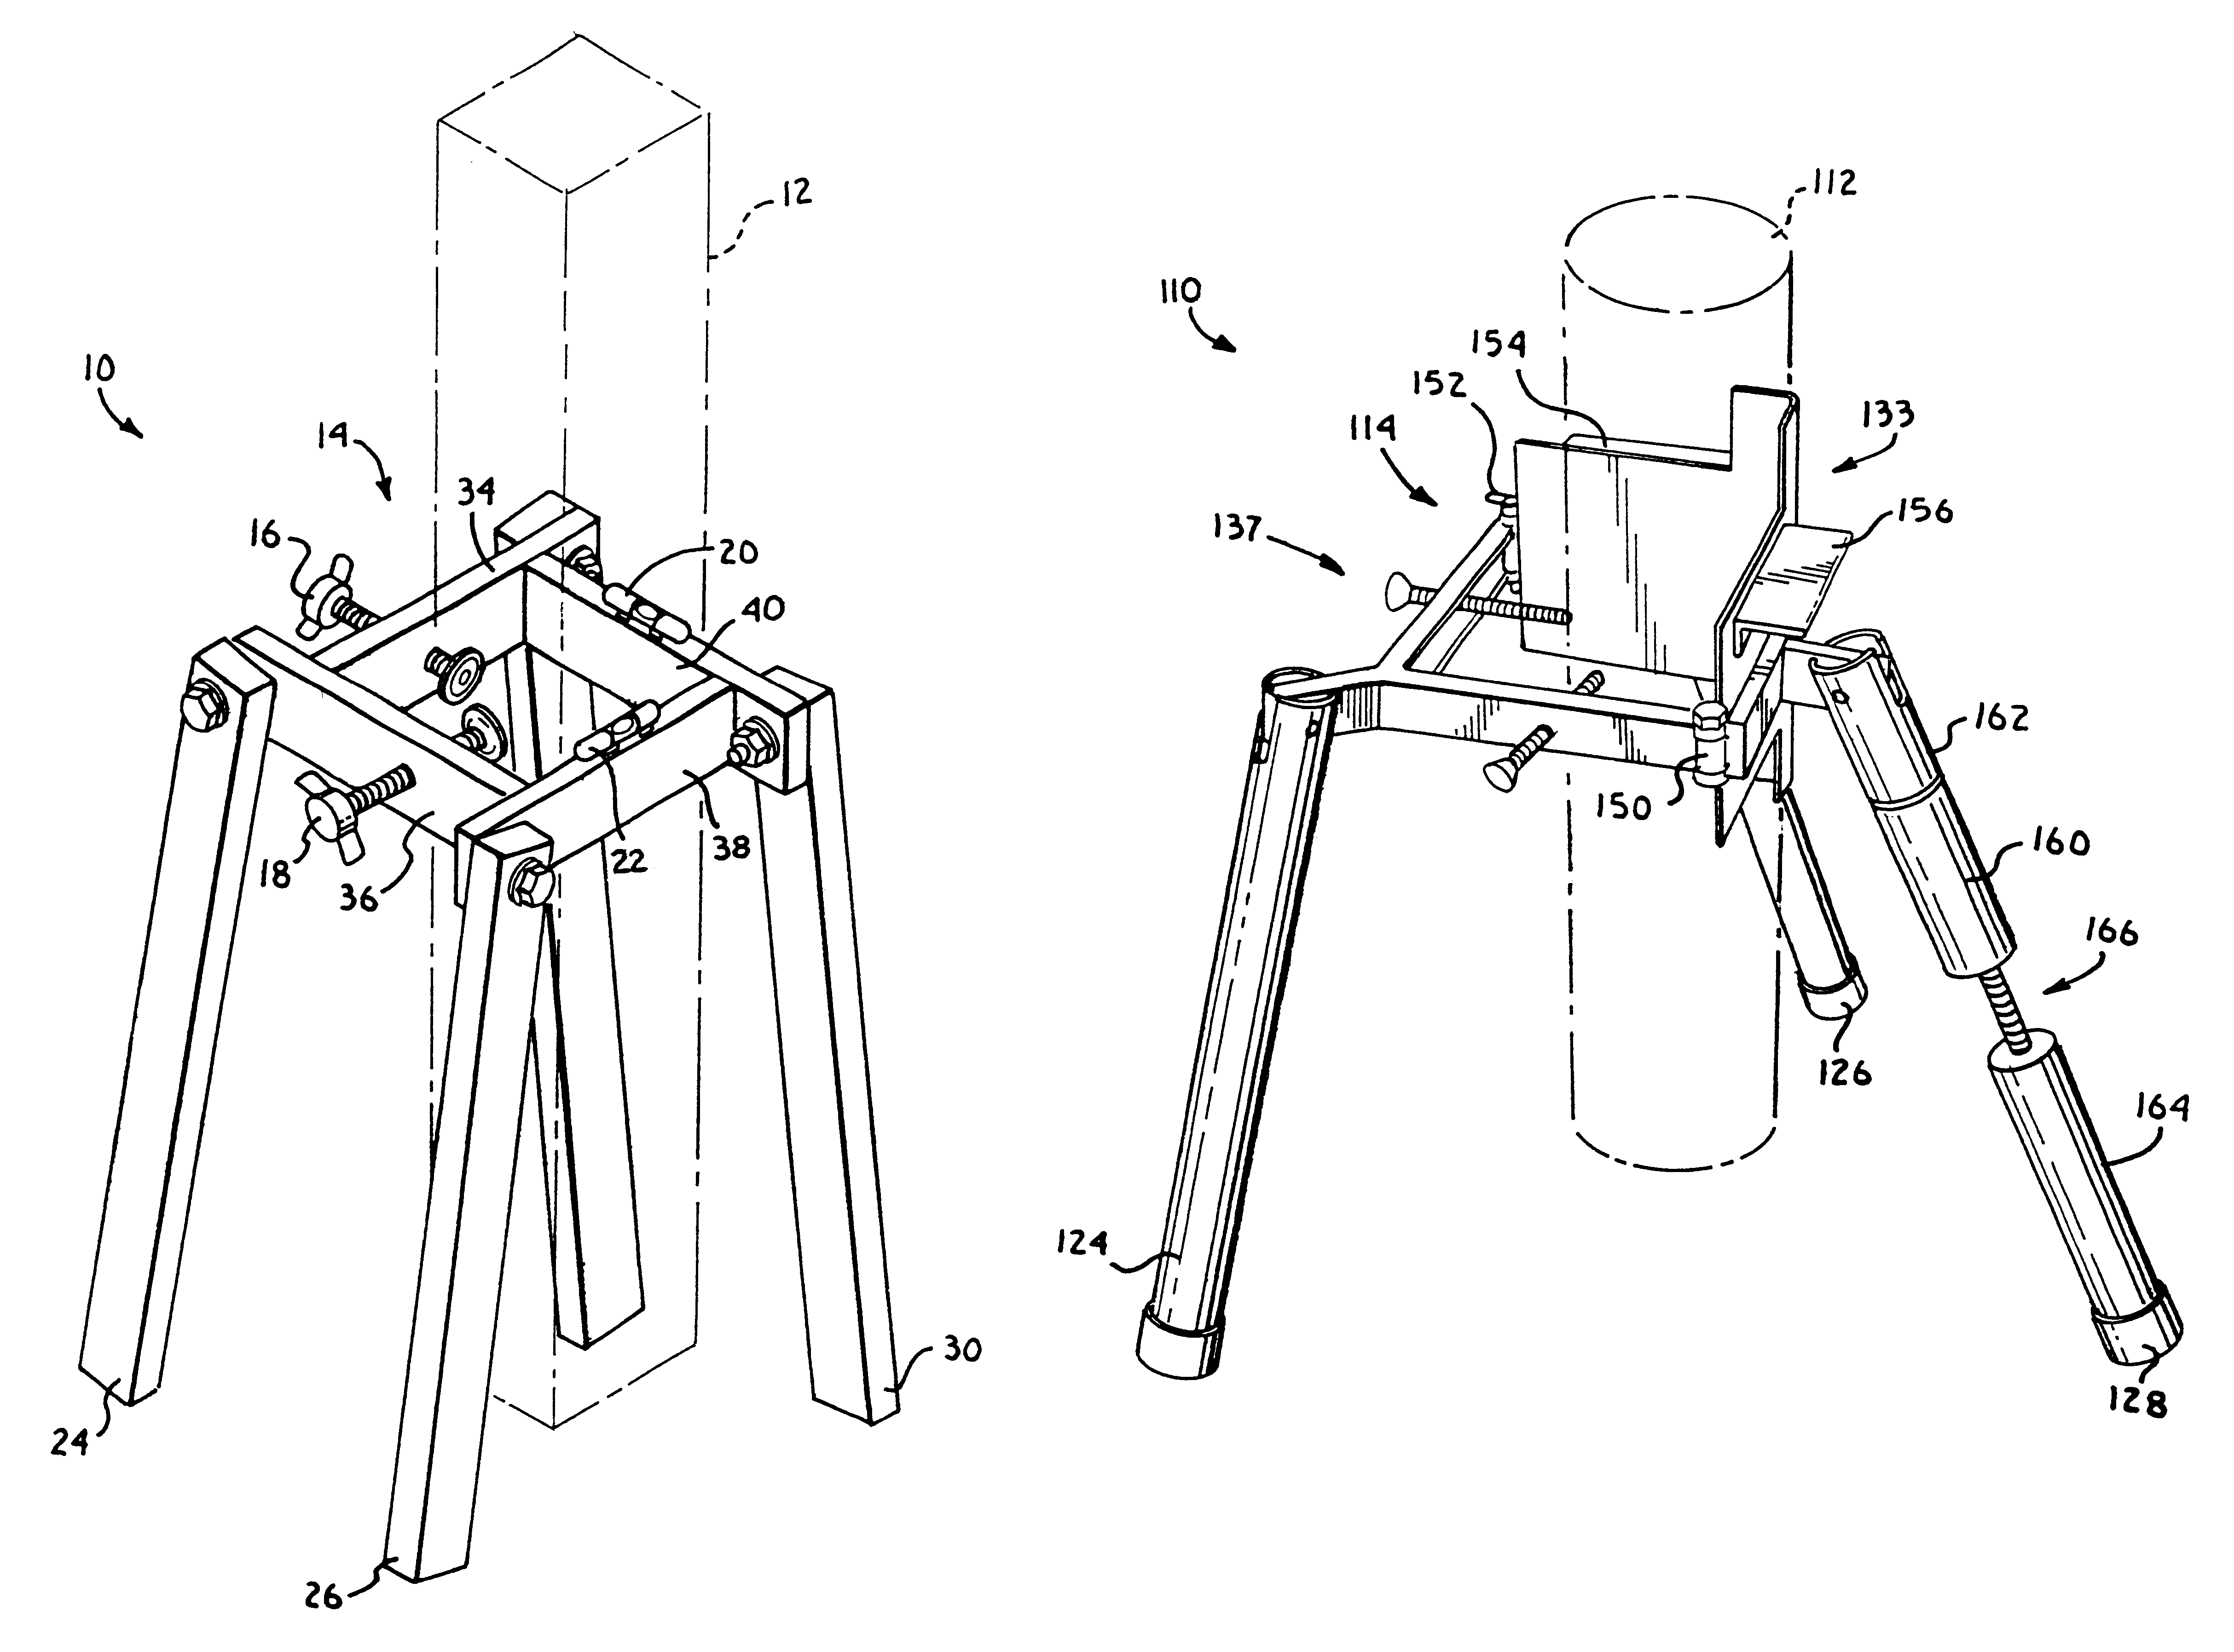 Self-supporting post leveling device